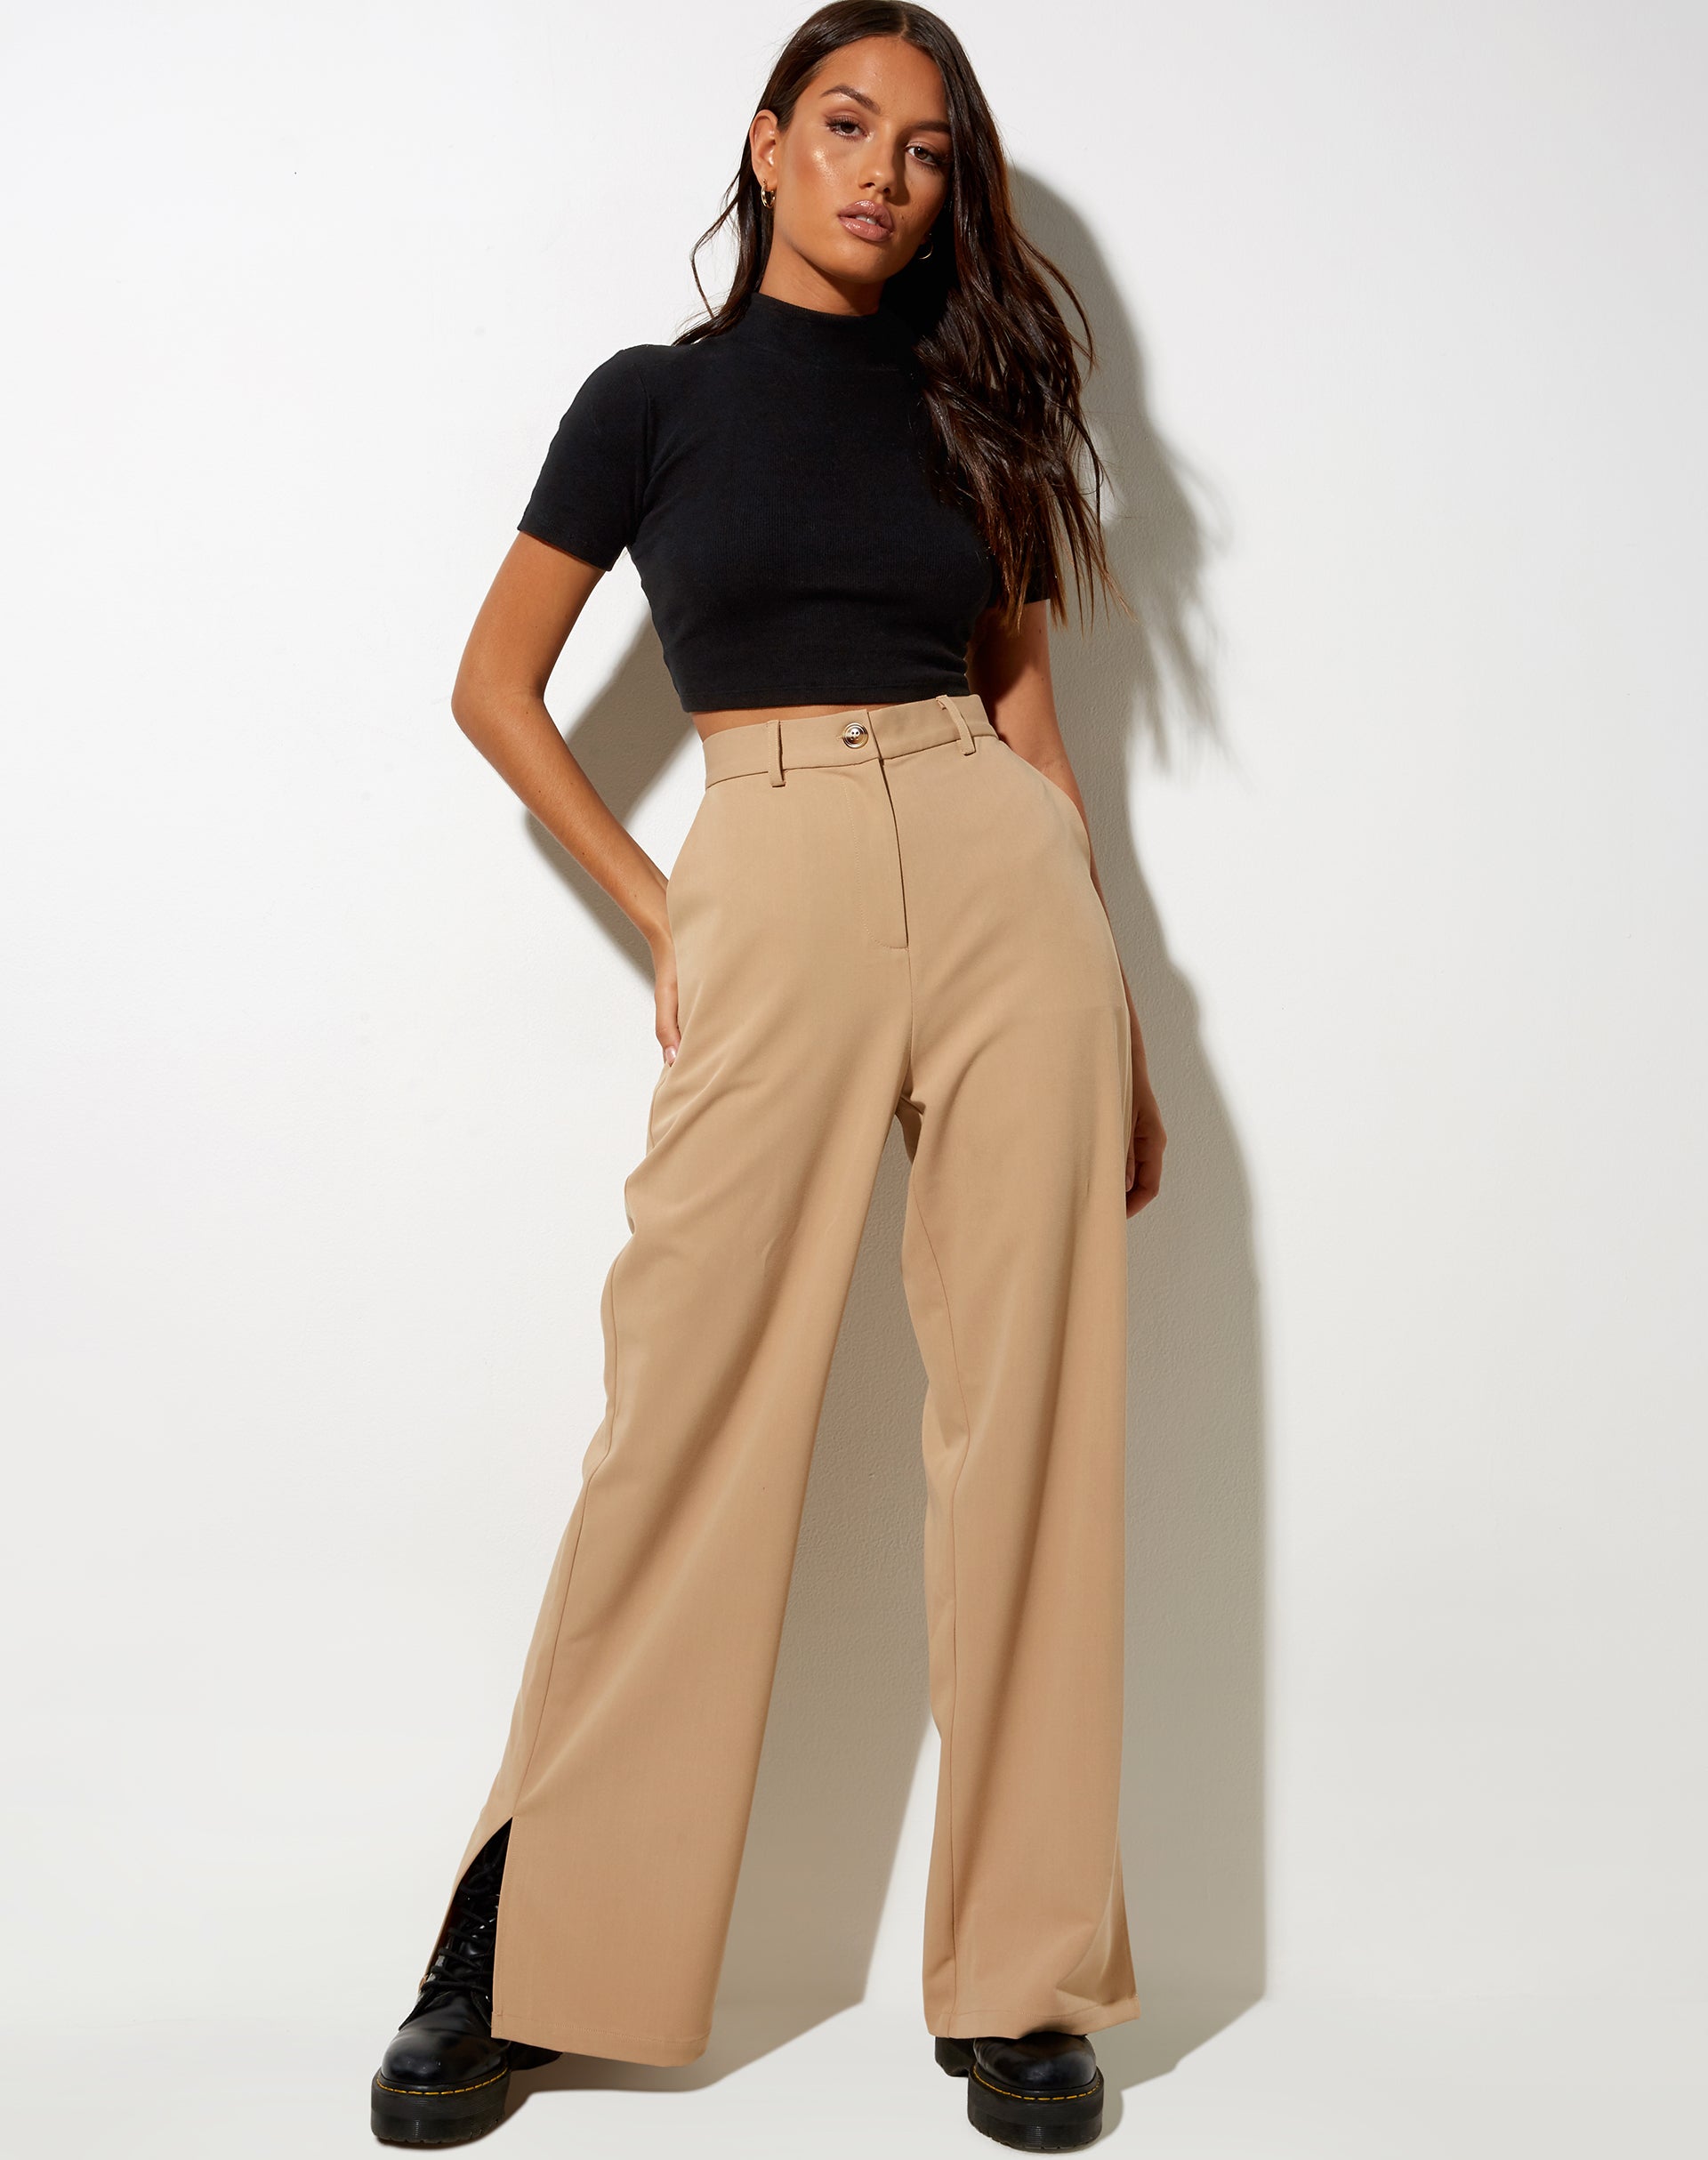 Image of Gege Trouser in Almond